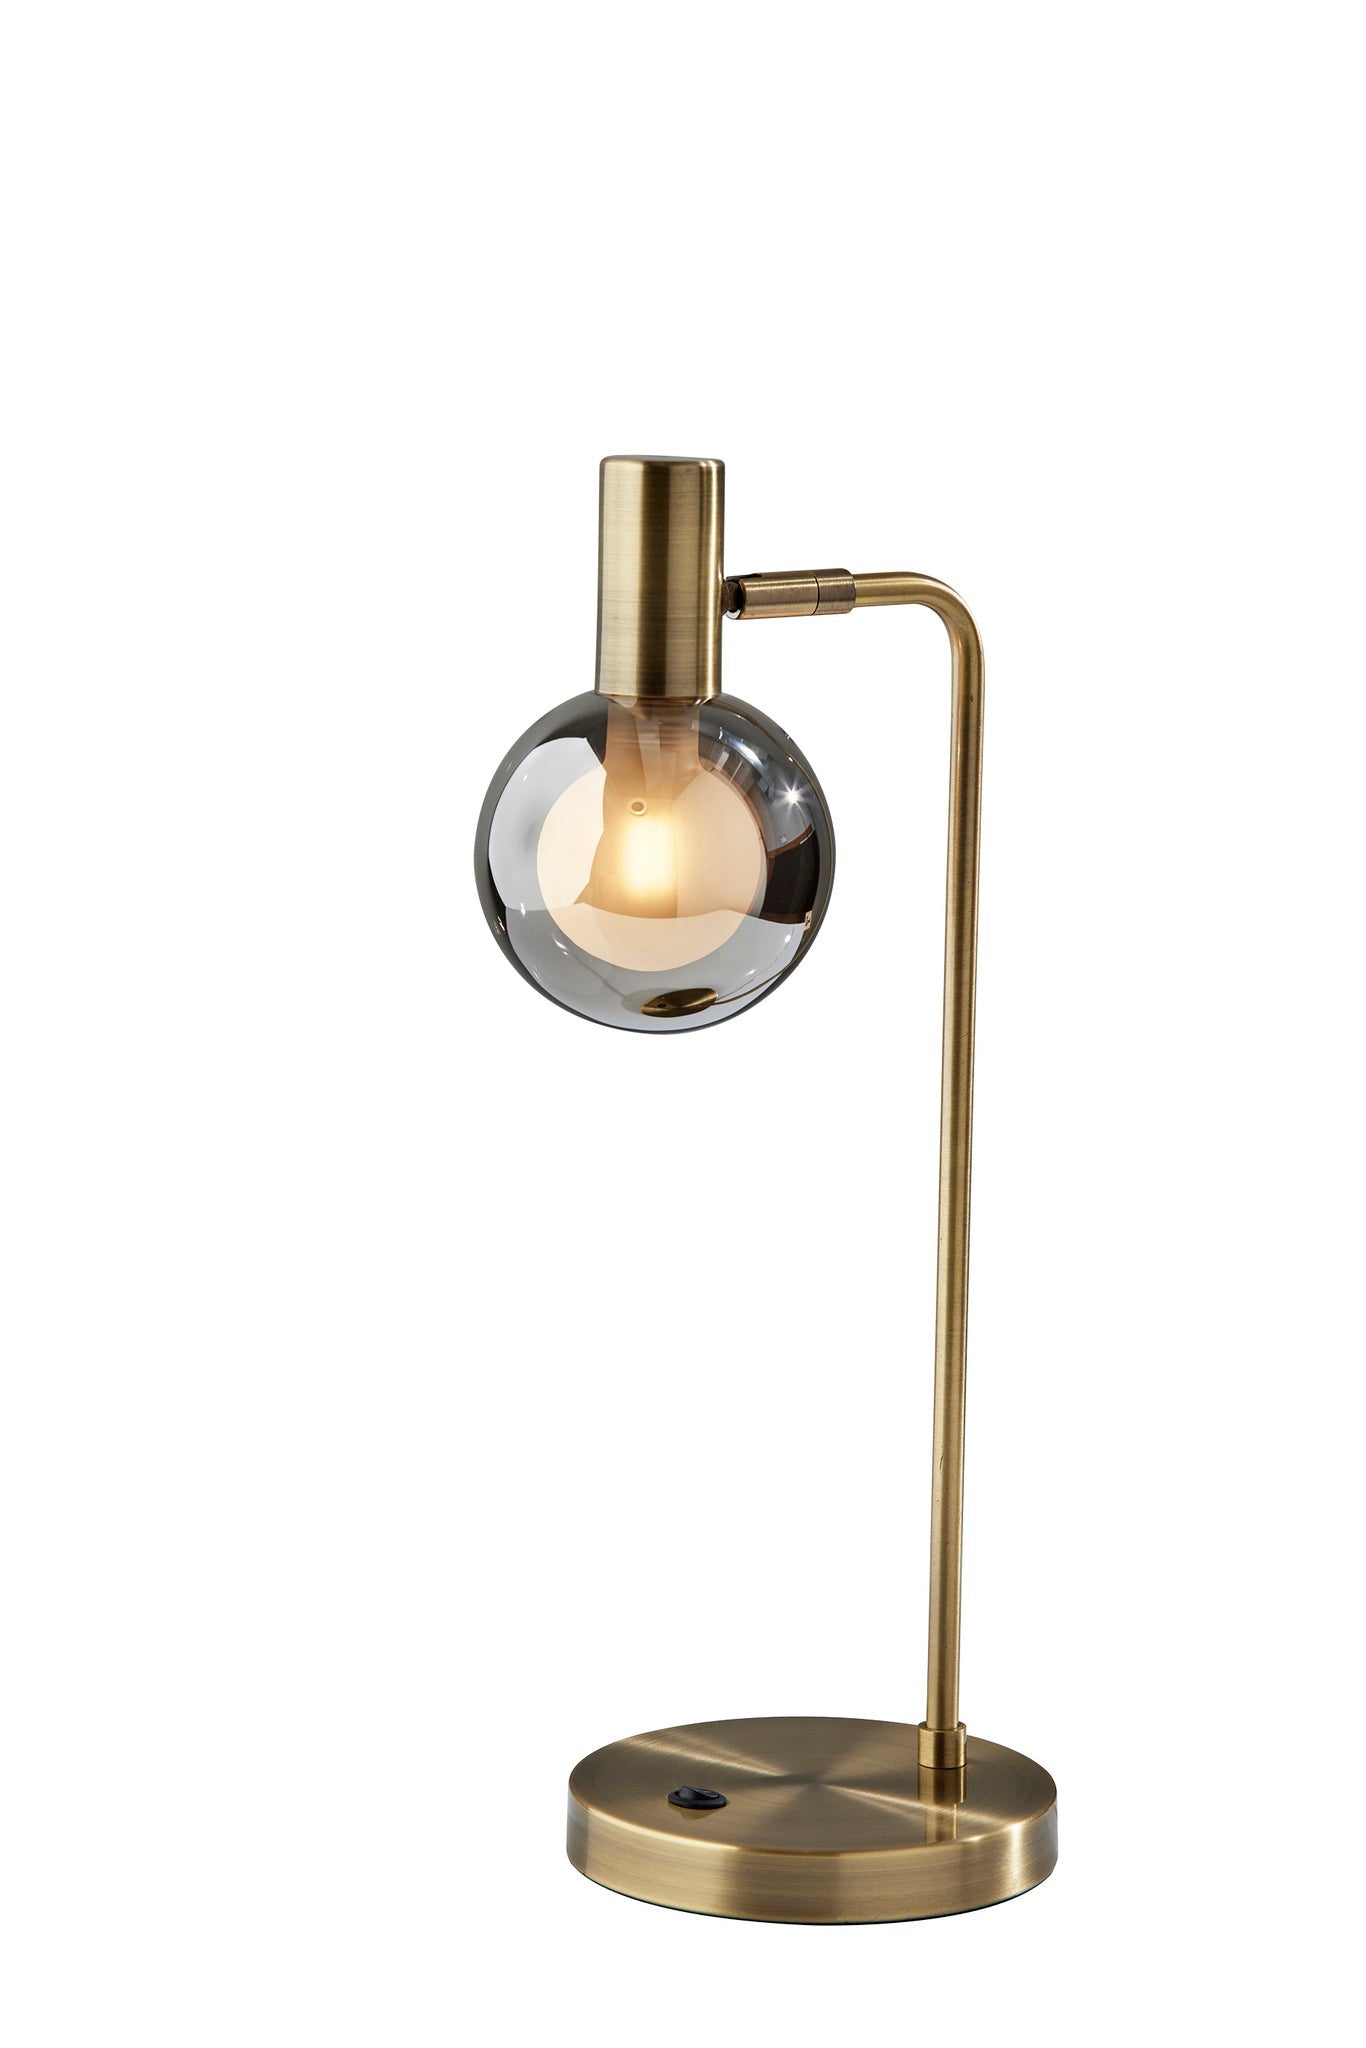 18" Antiqued Brass Metal Cylinder Desk Table Lamp With Gray Globe Shade With Starling LED Bulb